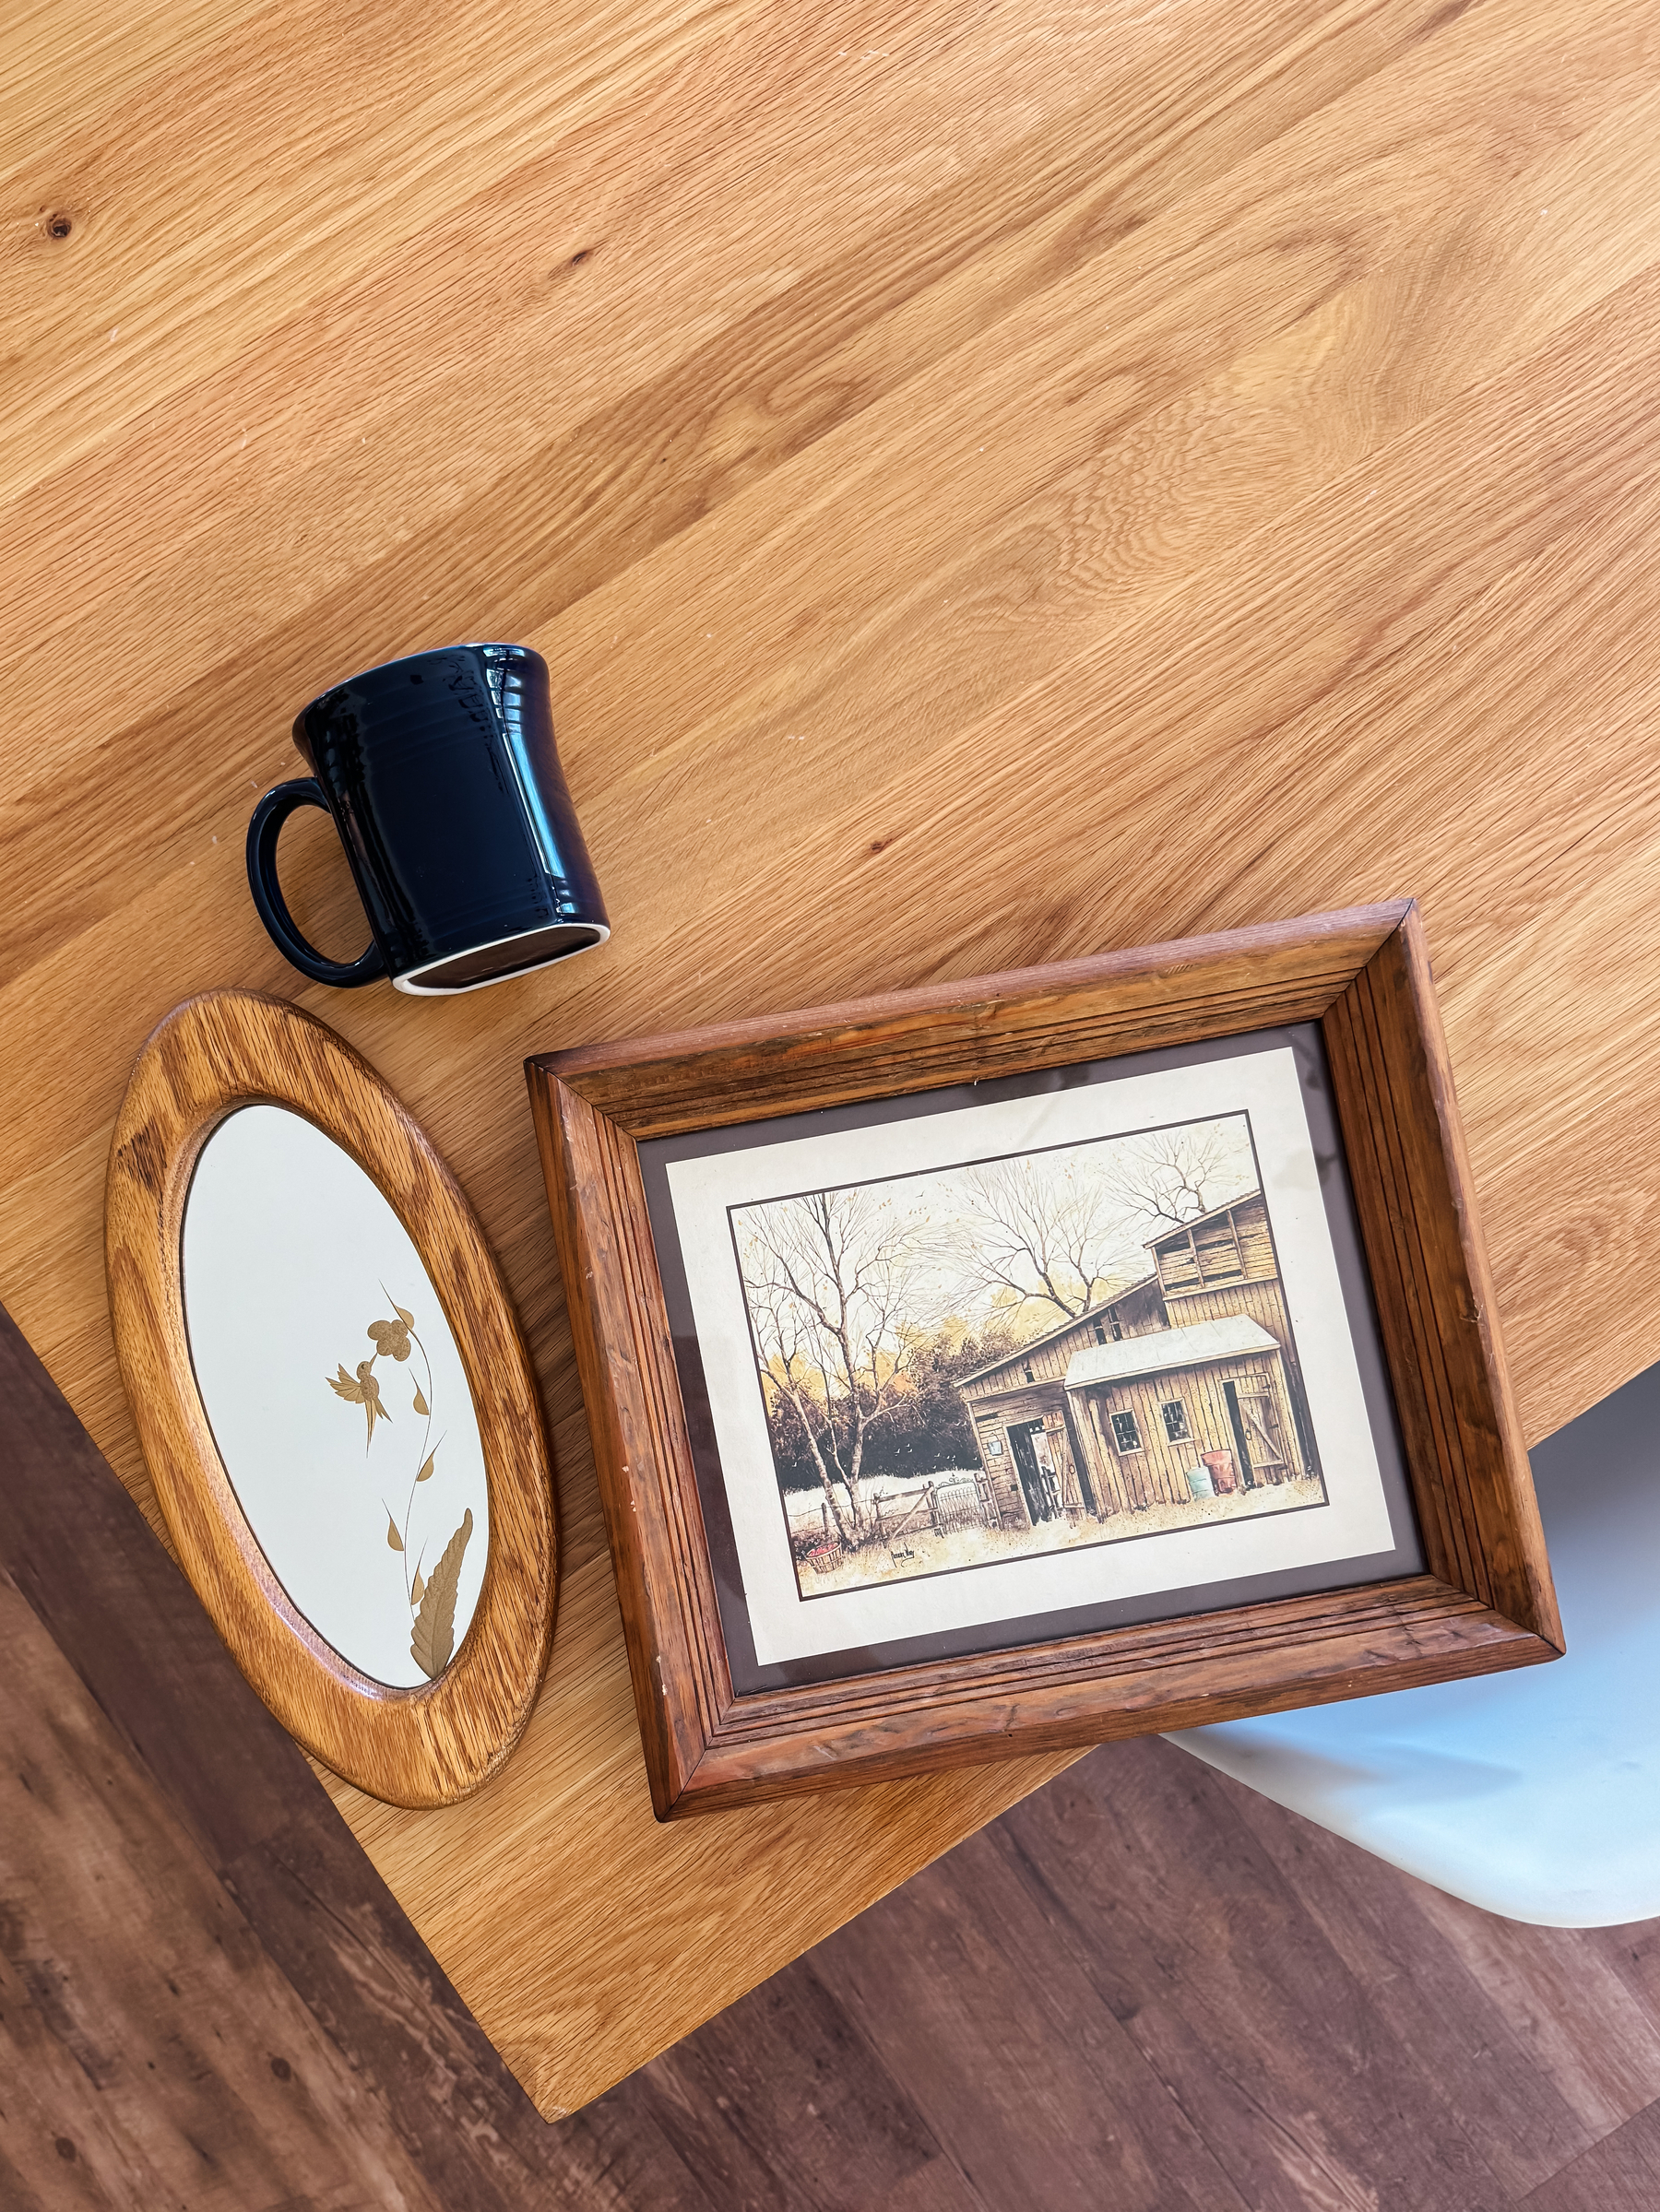 A thrifted oval mirror with an etched on hummingbird, a cobalt blue FiestawRe mug, and a framed old barn print